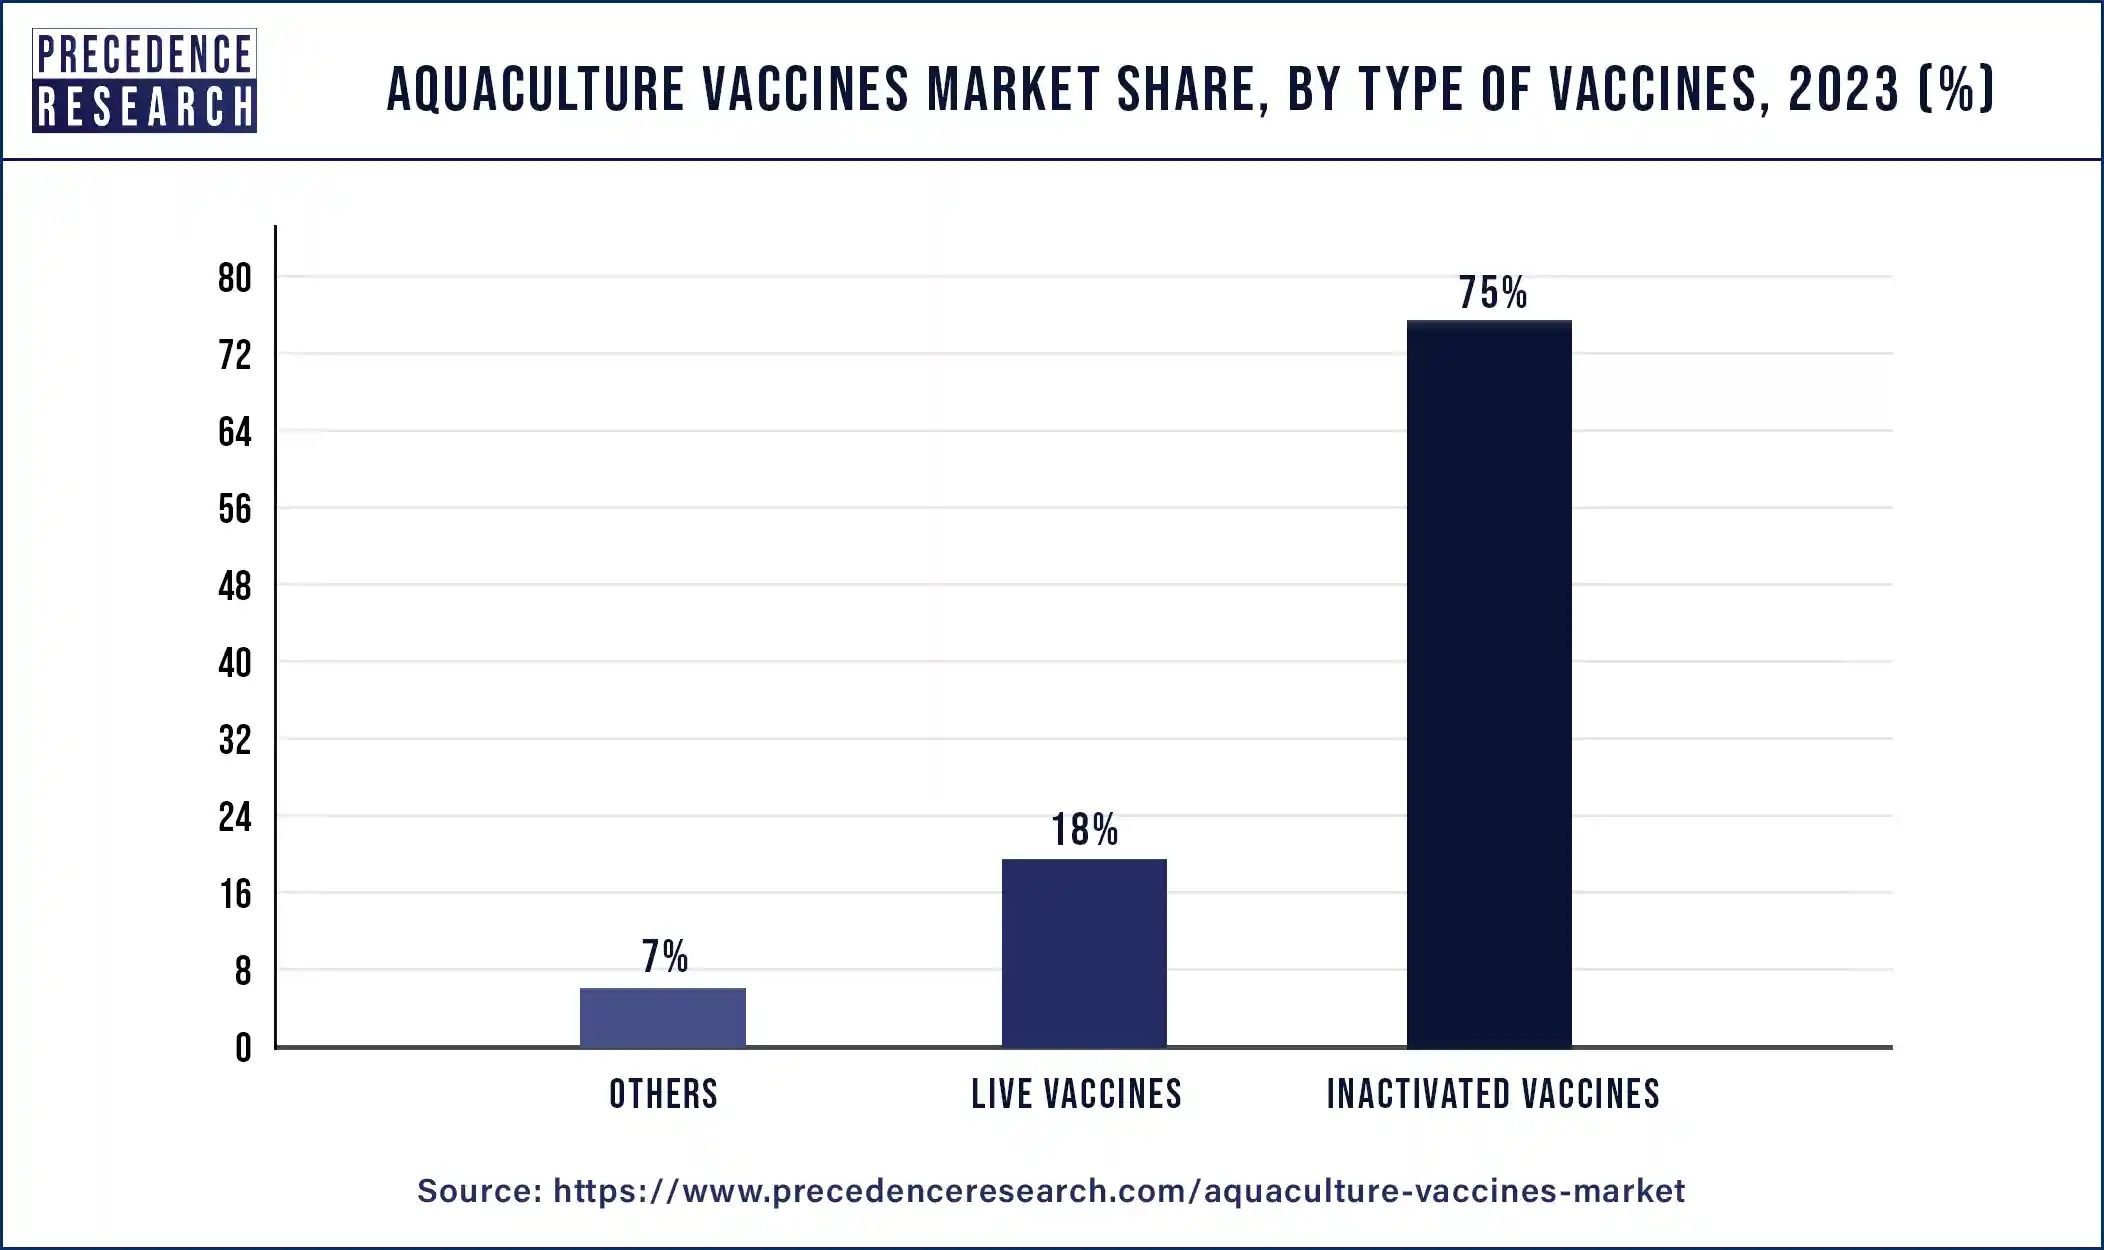 Aquaculture Vaccines Market Share, By Type of Vaccines, 2023 (%)